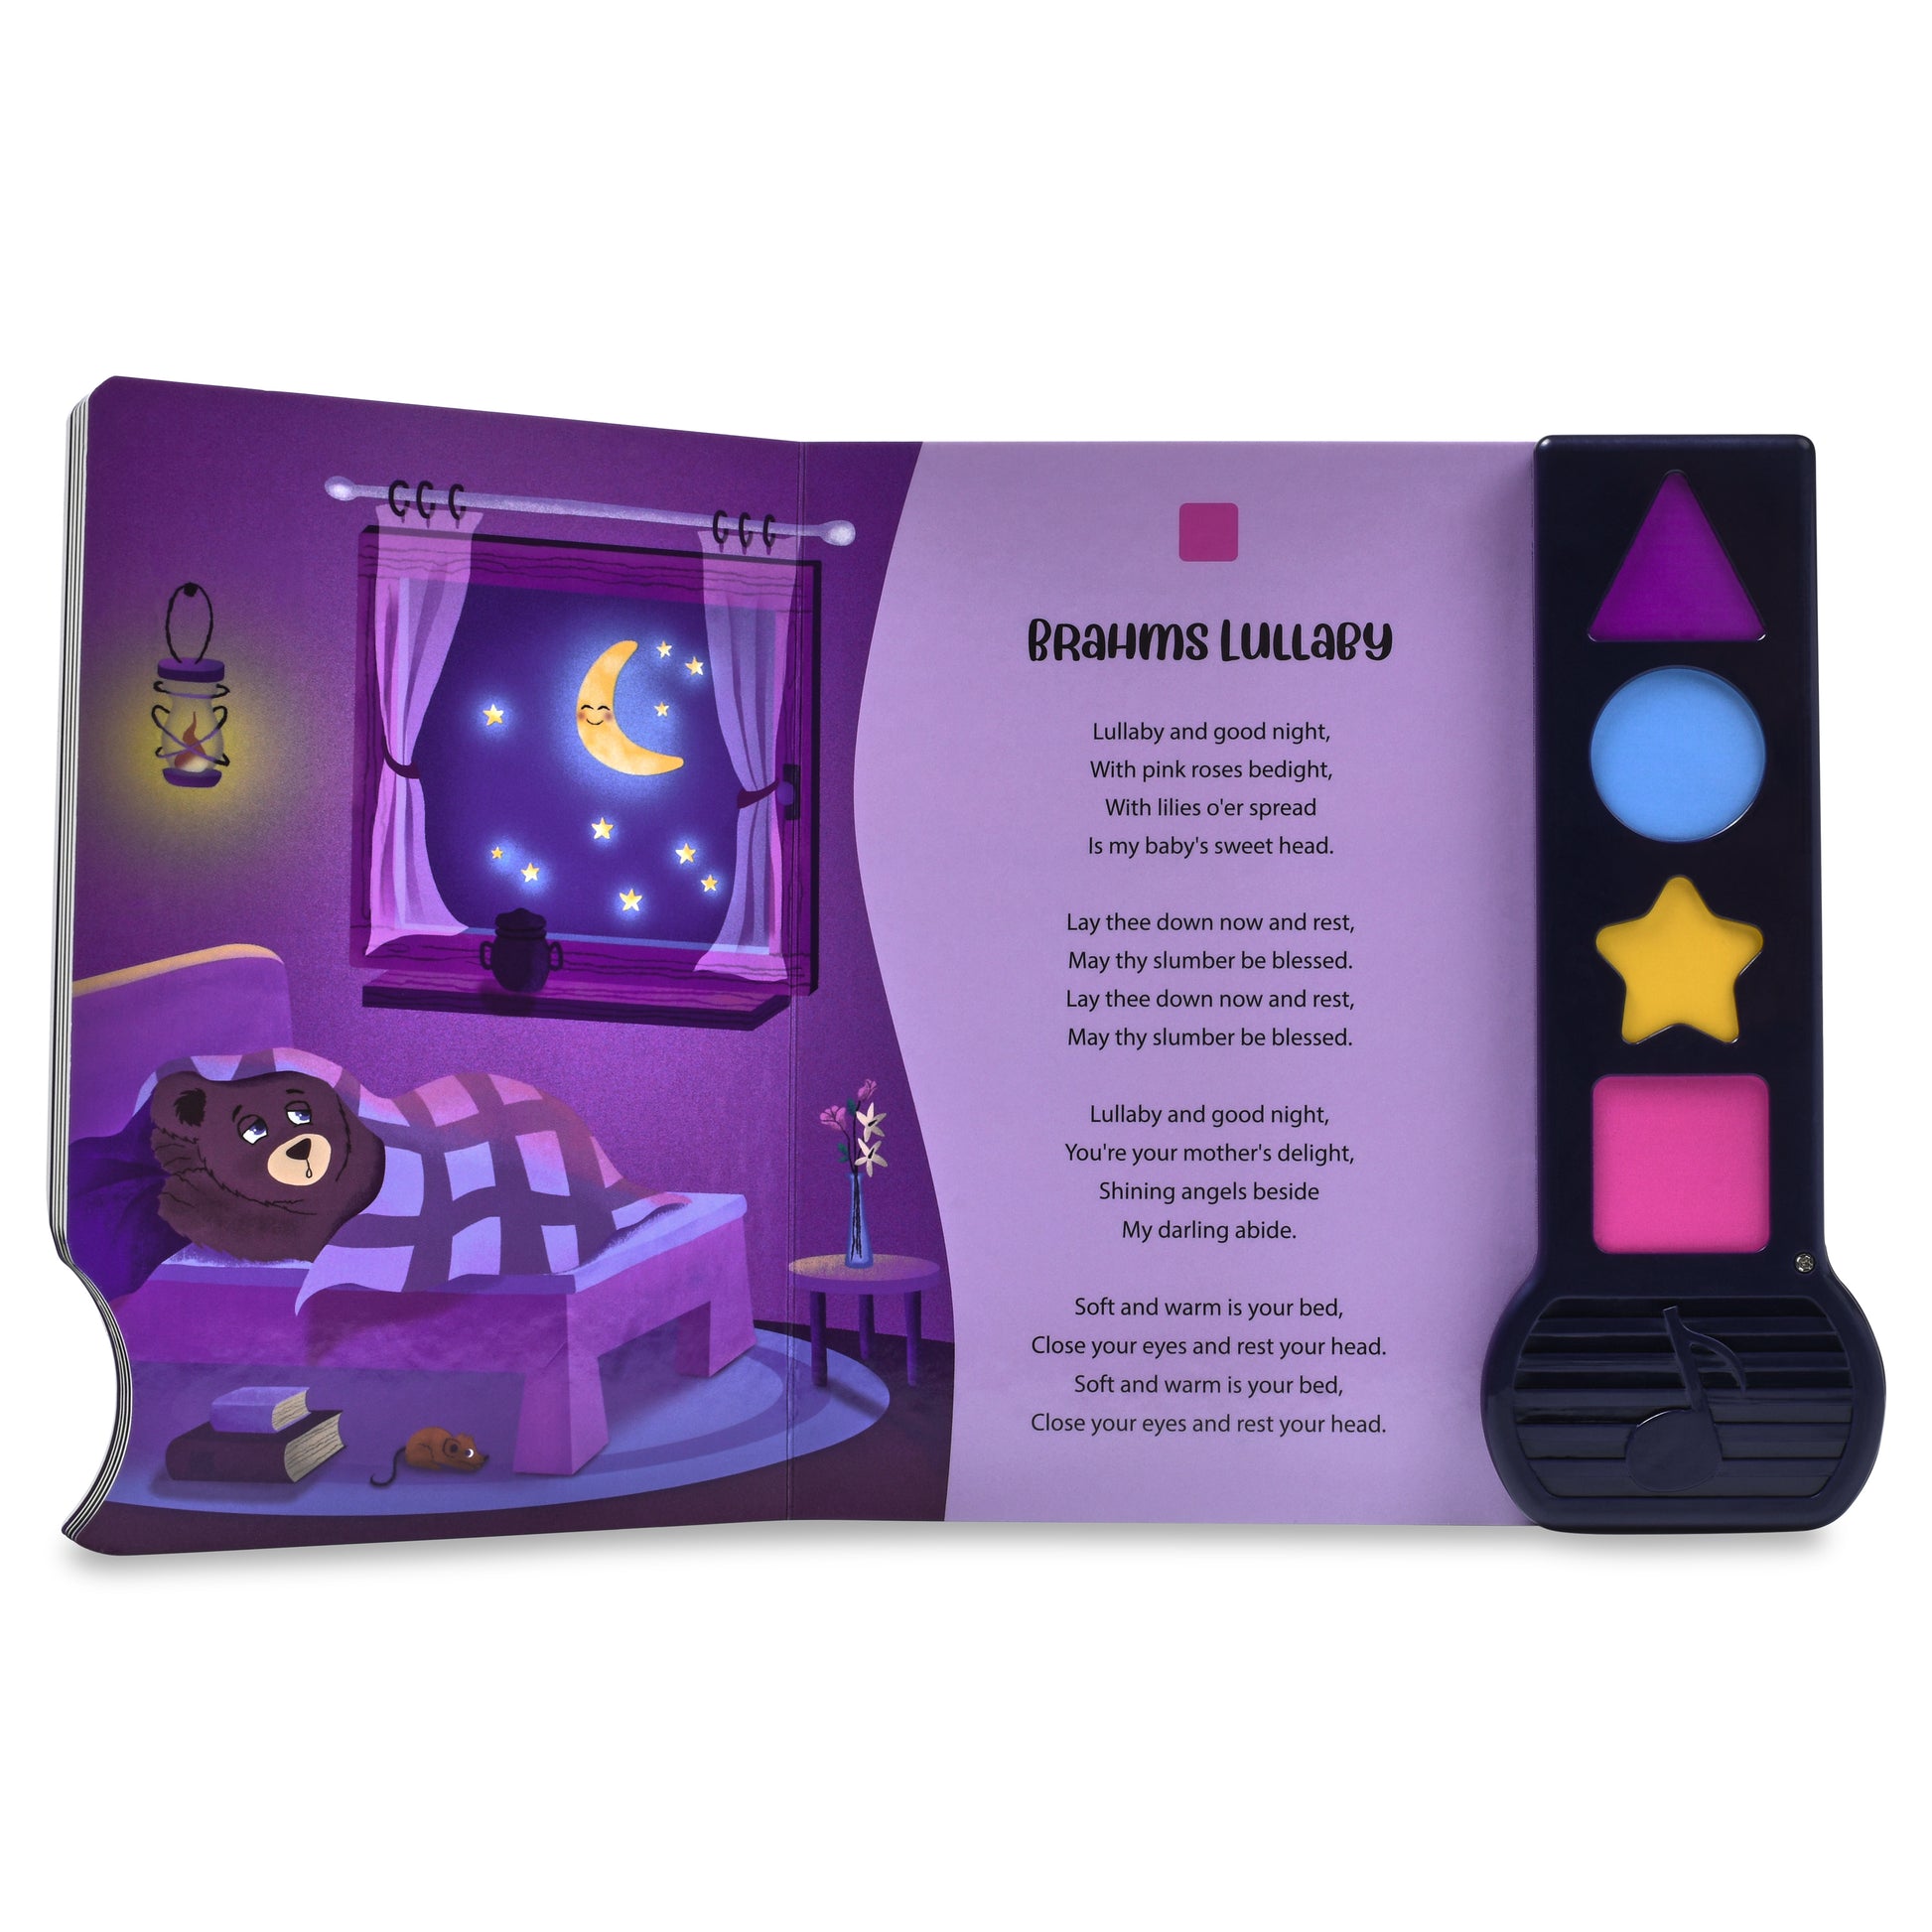 Brahm's Lullaby song Toddlers